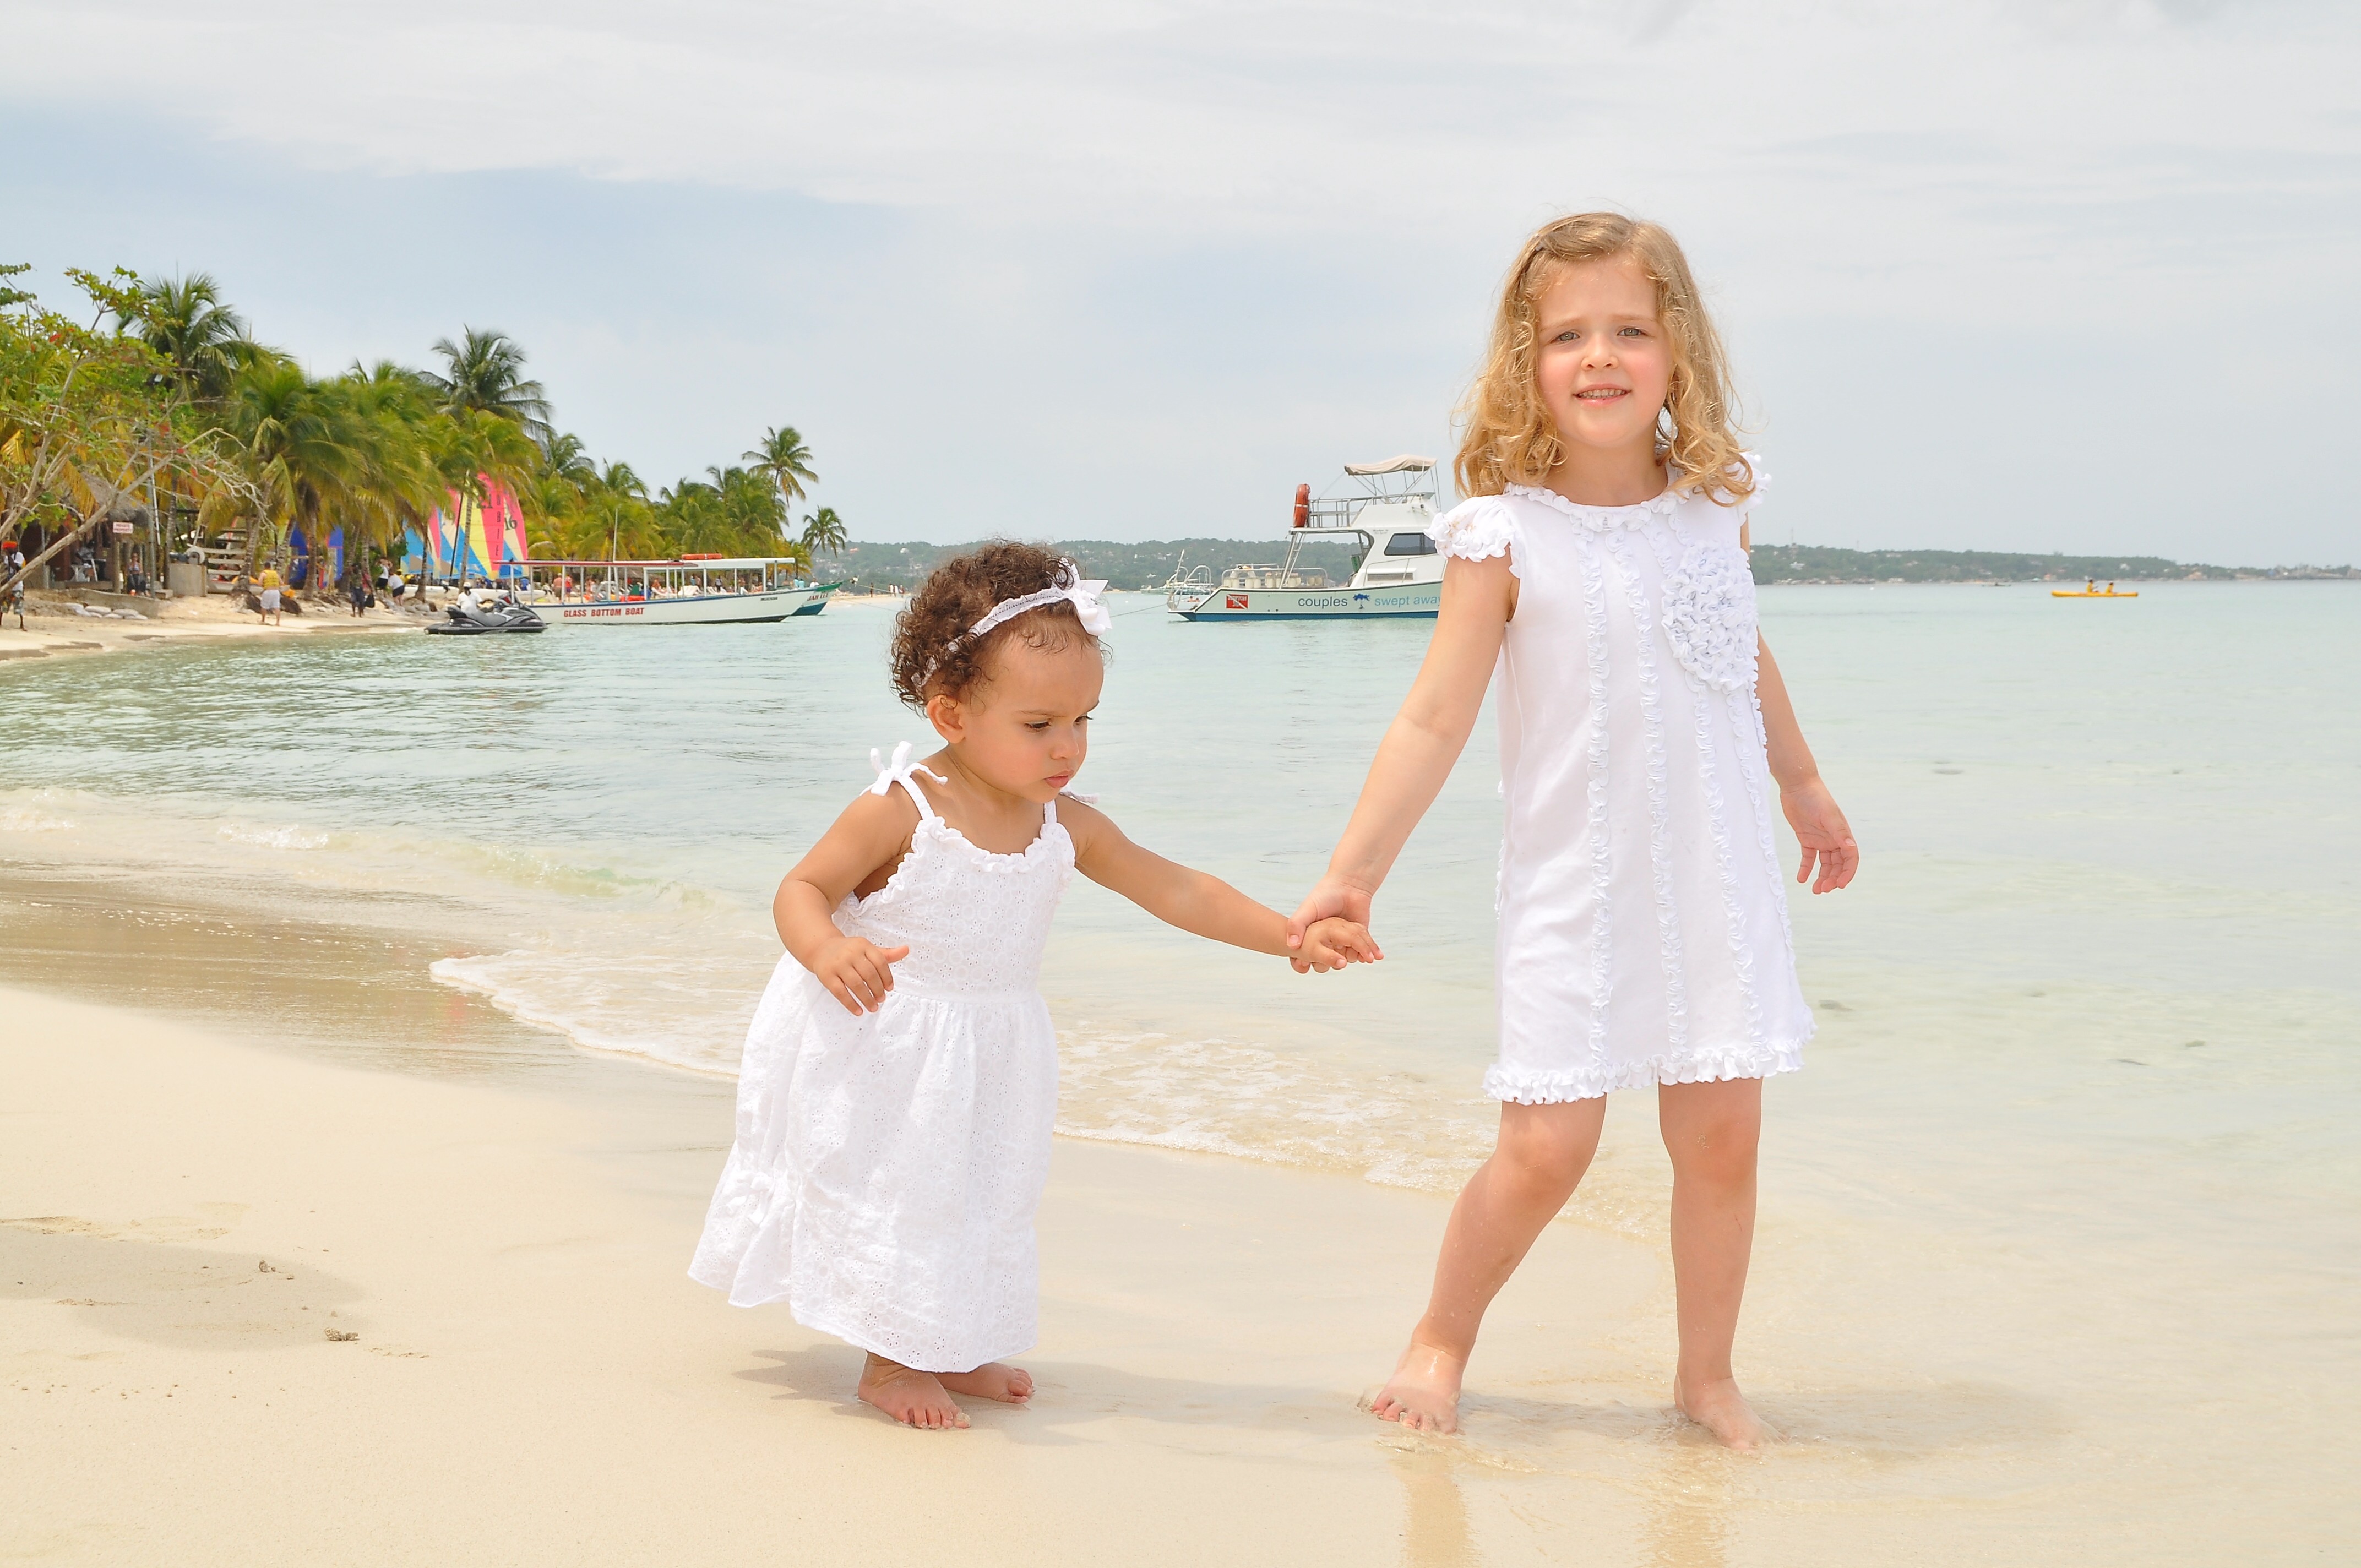 Young girls at the beach photo